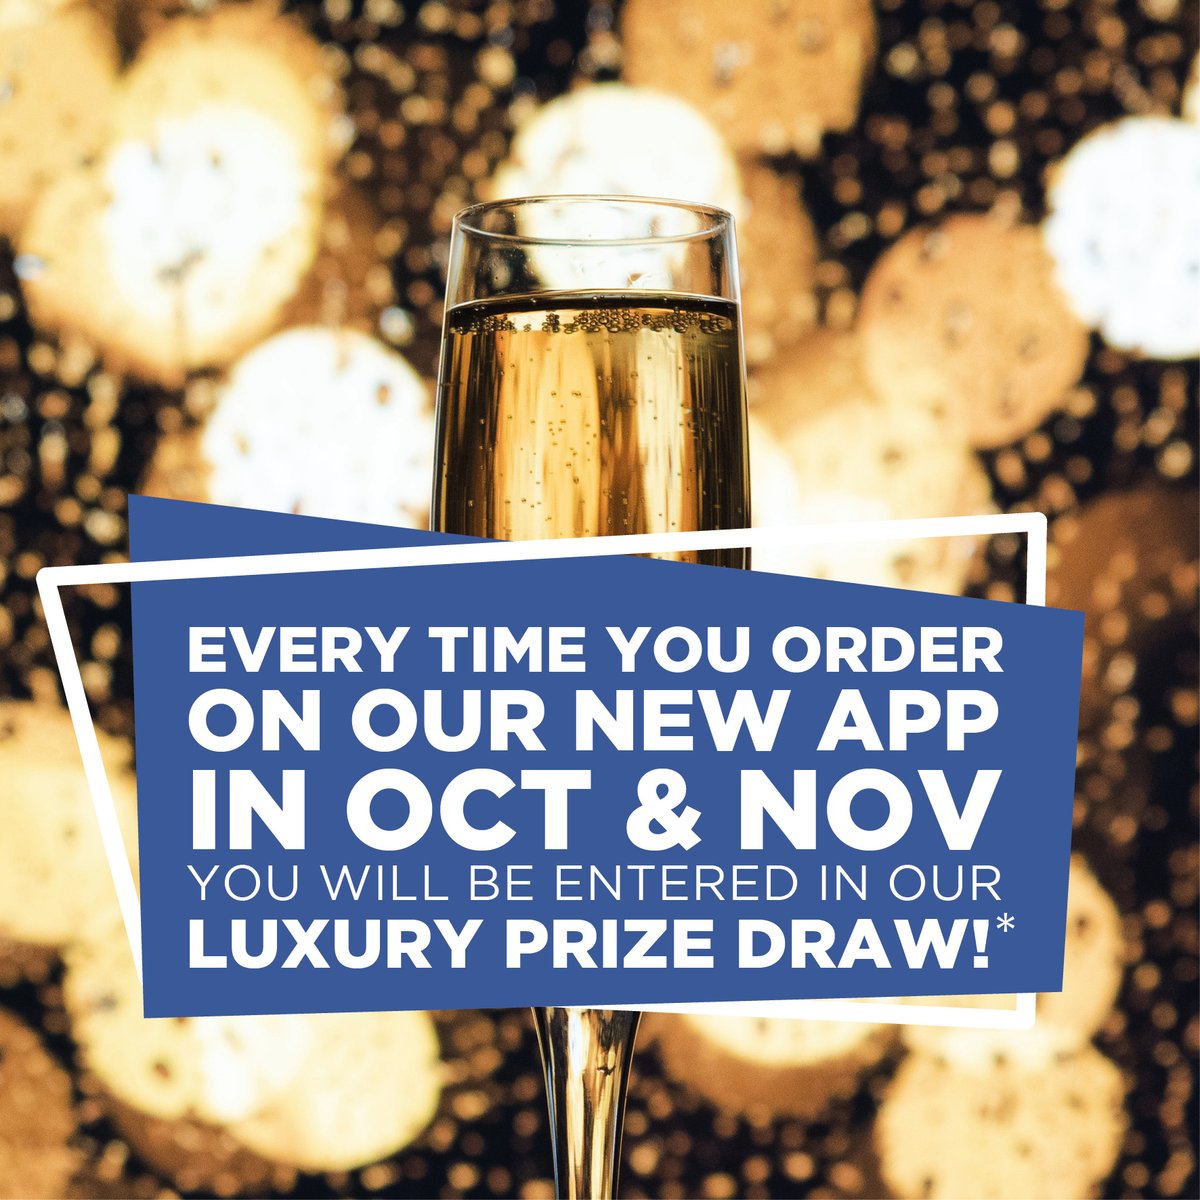 That's right! Every time you place an order using our new app throughout October and November, you'll be entered into our exclusive luxury prize draw. So download the app today! Let's go...

#hillsprospect #leadingtheway #fuellinggoodtimes #deliveringexcellence #spolitforchoice